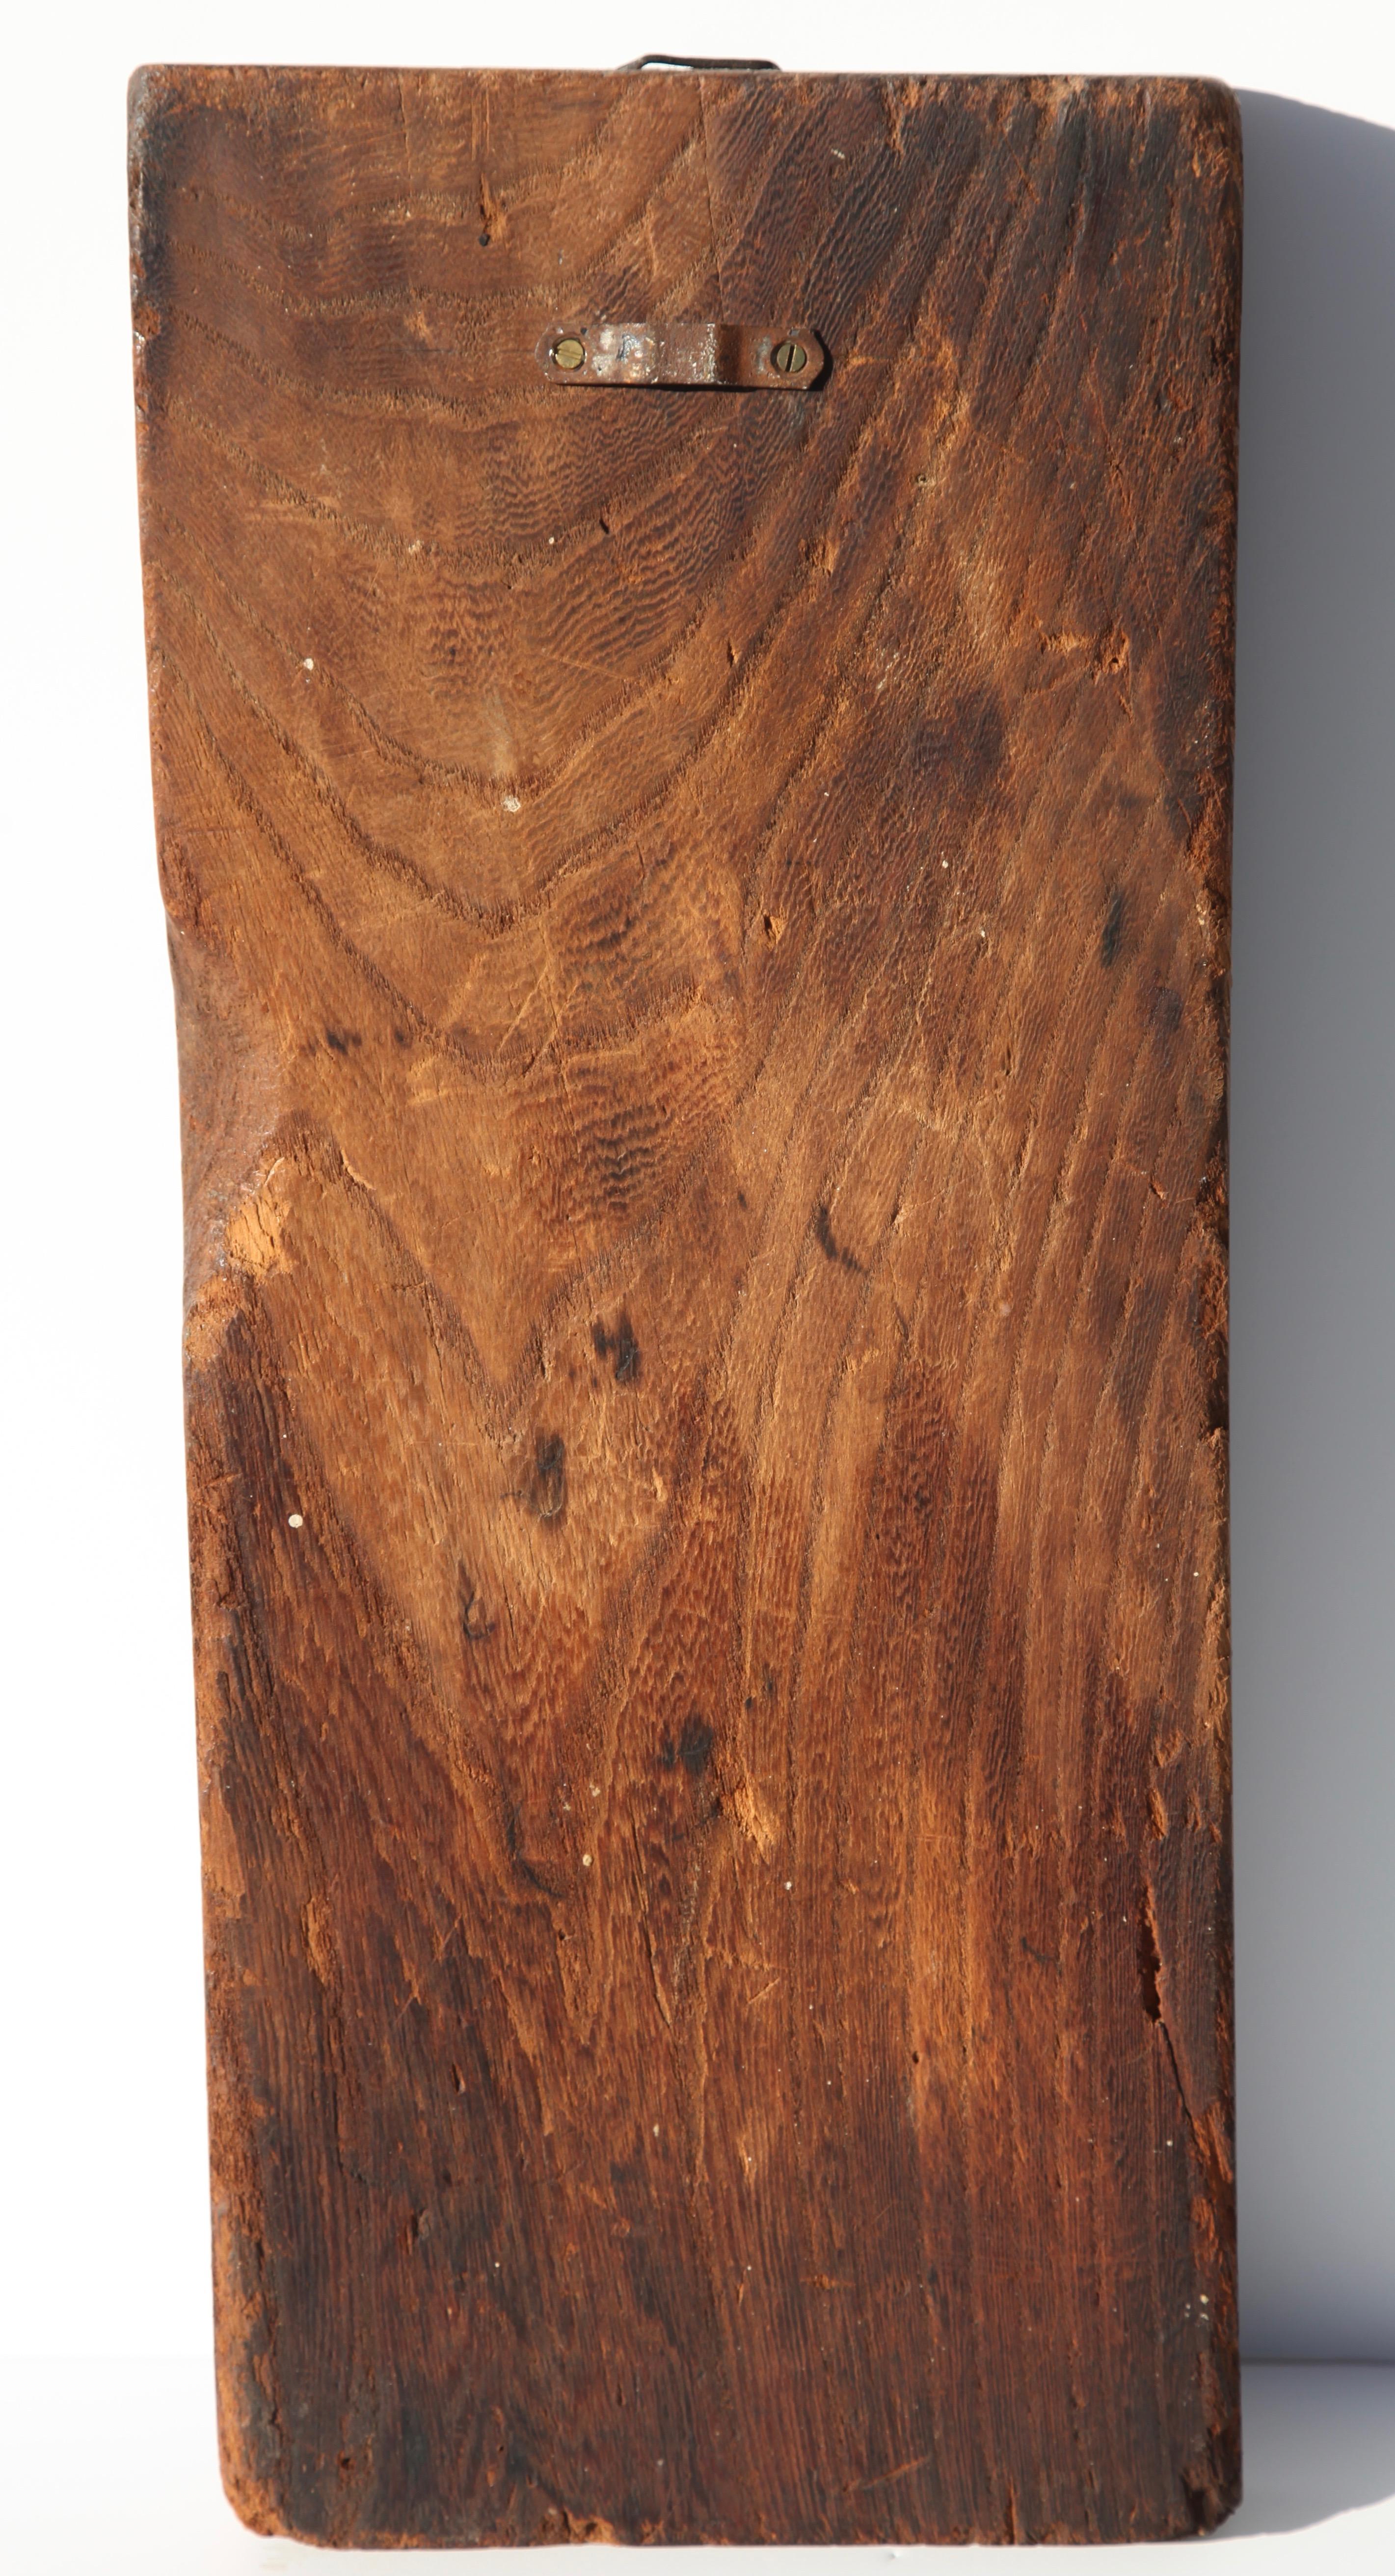 Elm ‘Speculaasplank’, Traditional Mold for the Belgian Version of ‘gingerbread man’